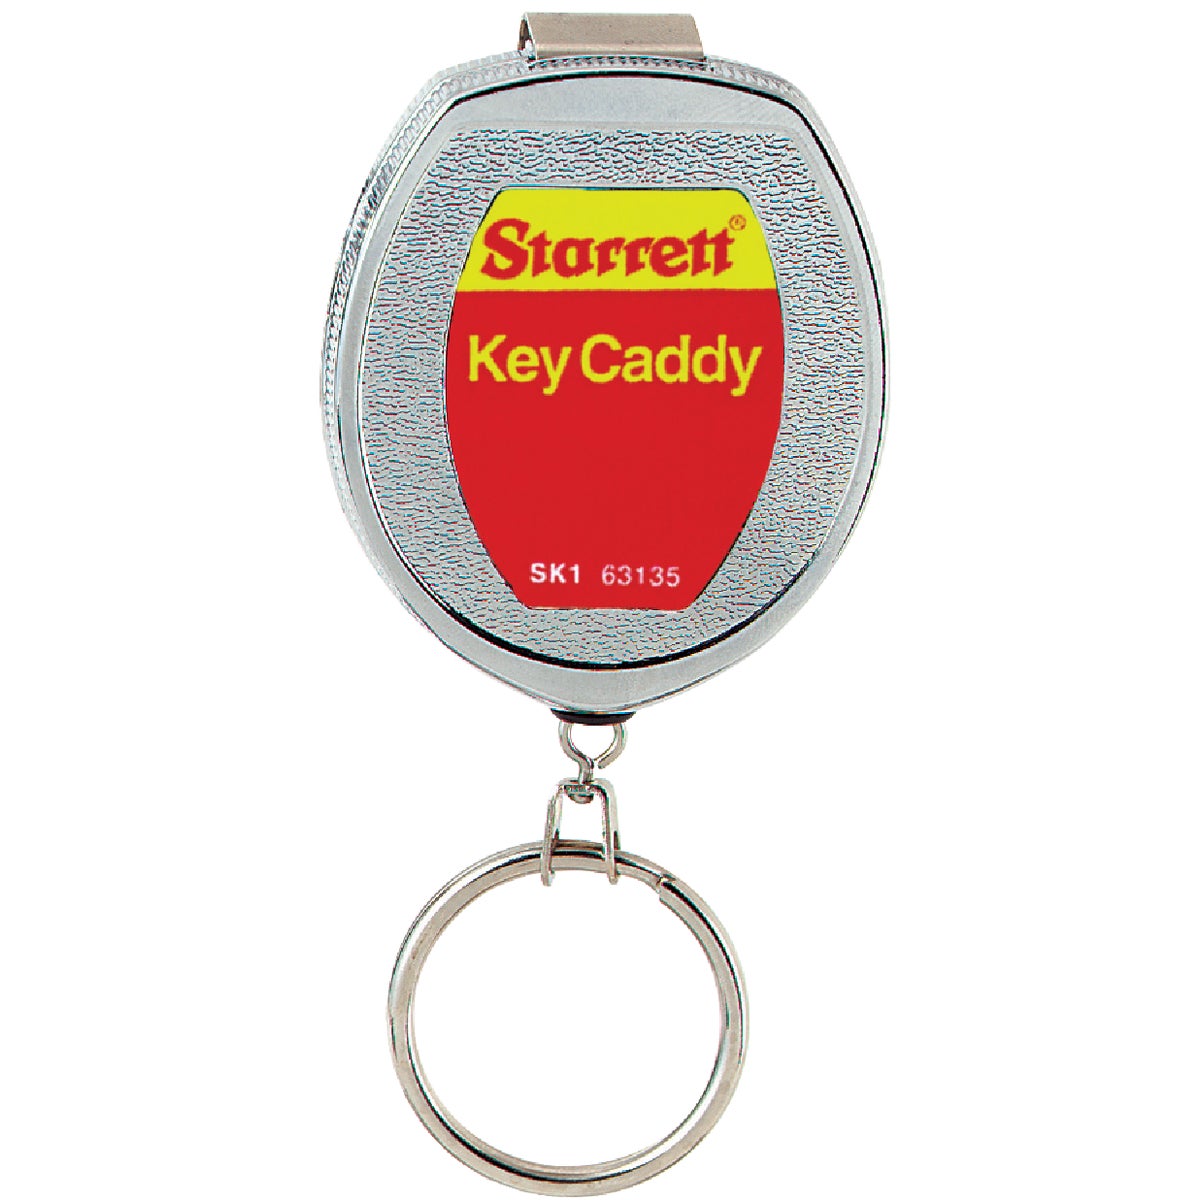 Item 309362, Key caddy with retractable key chain.